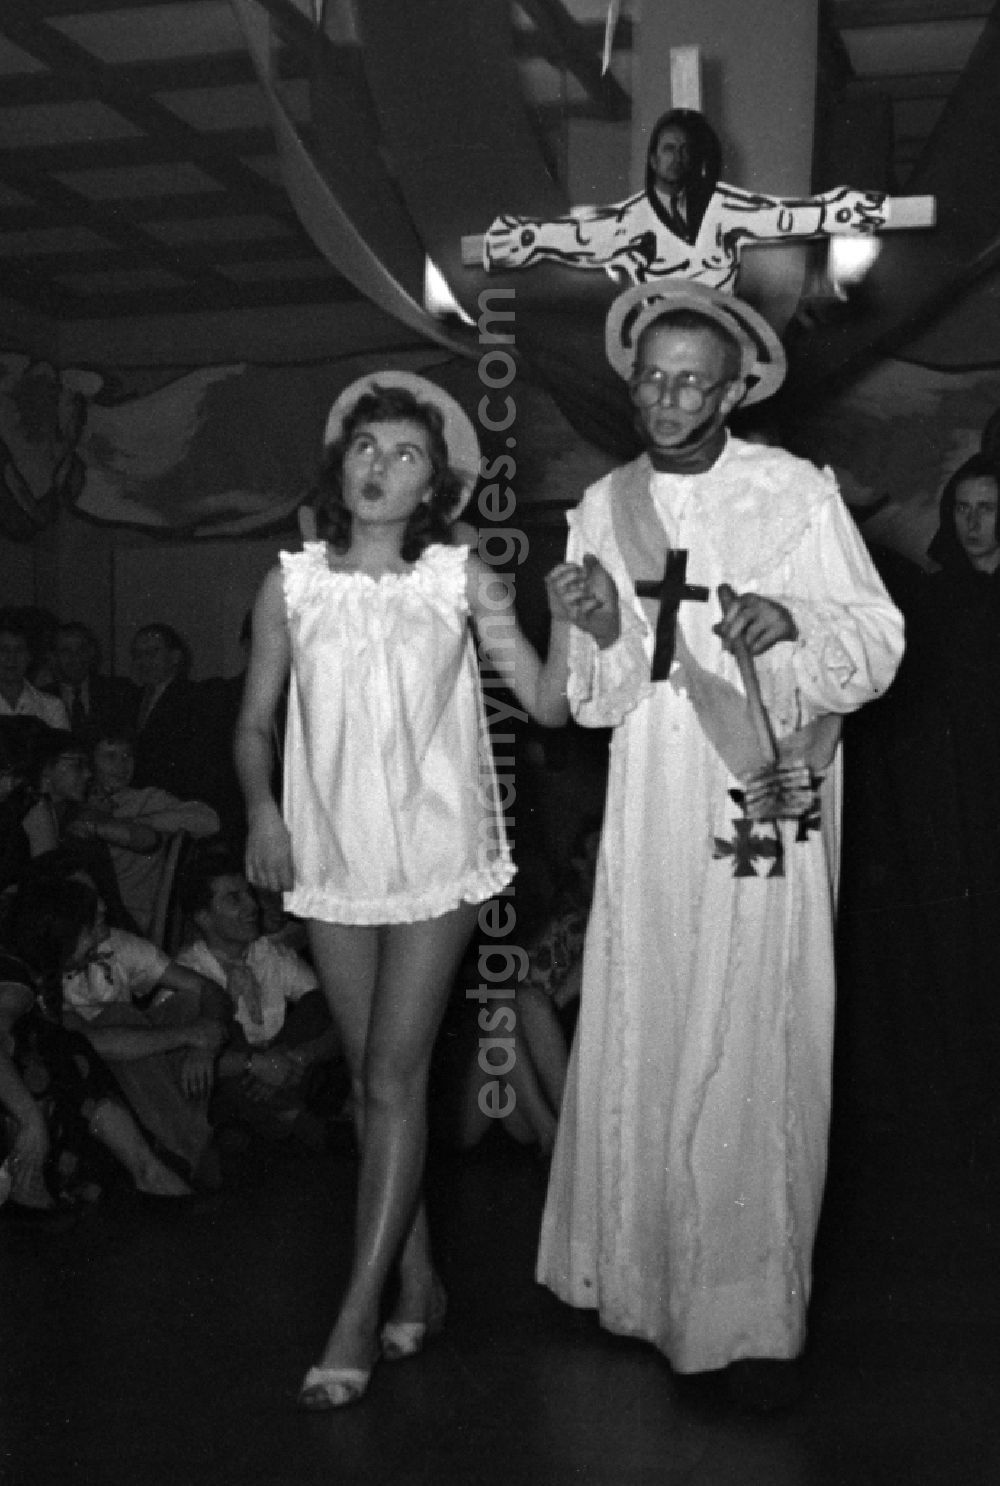 GDR picture archive: Potsdam - The Director Juergen Buechmann at a carnival event in the film school in the district Babelsberg in Potsdam in the state Brandenburg on the territory of the former GDR, German Democratic Republic